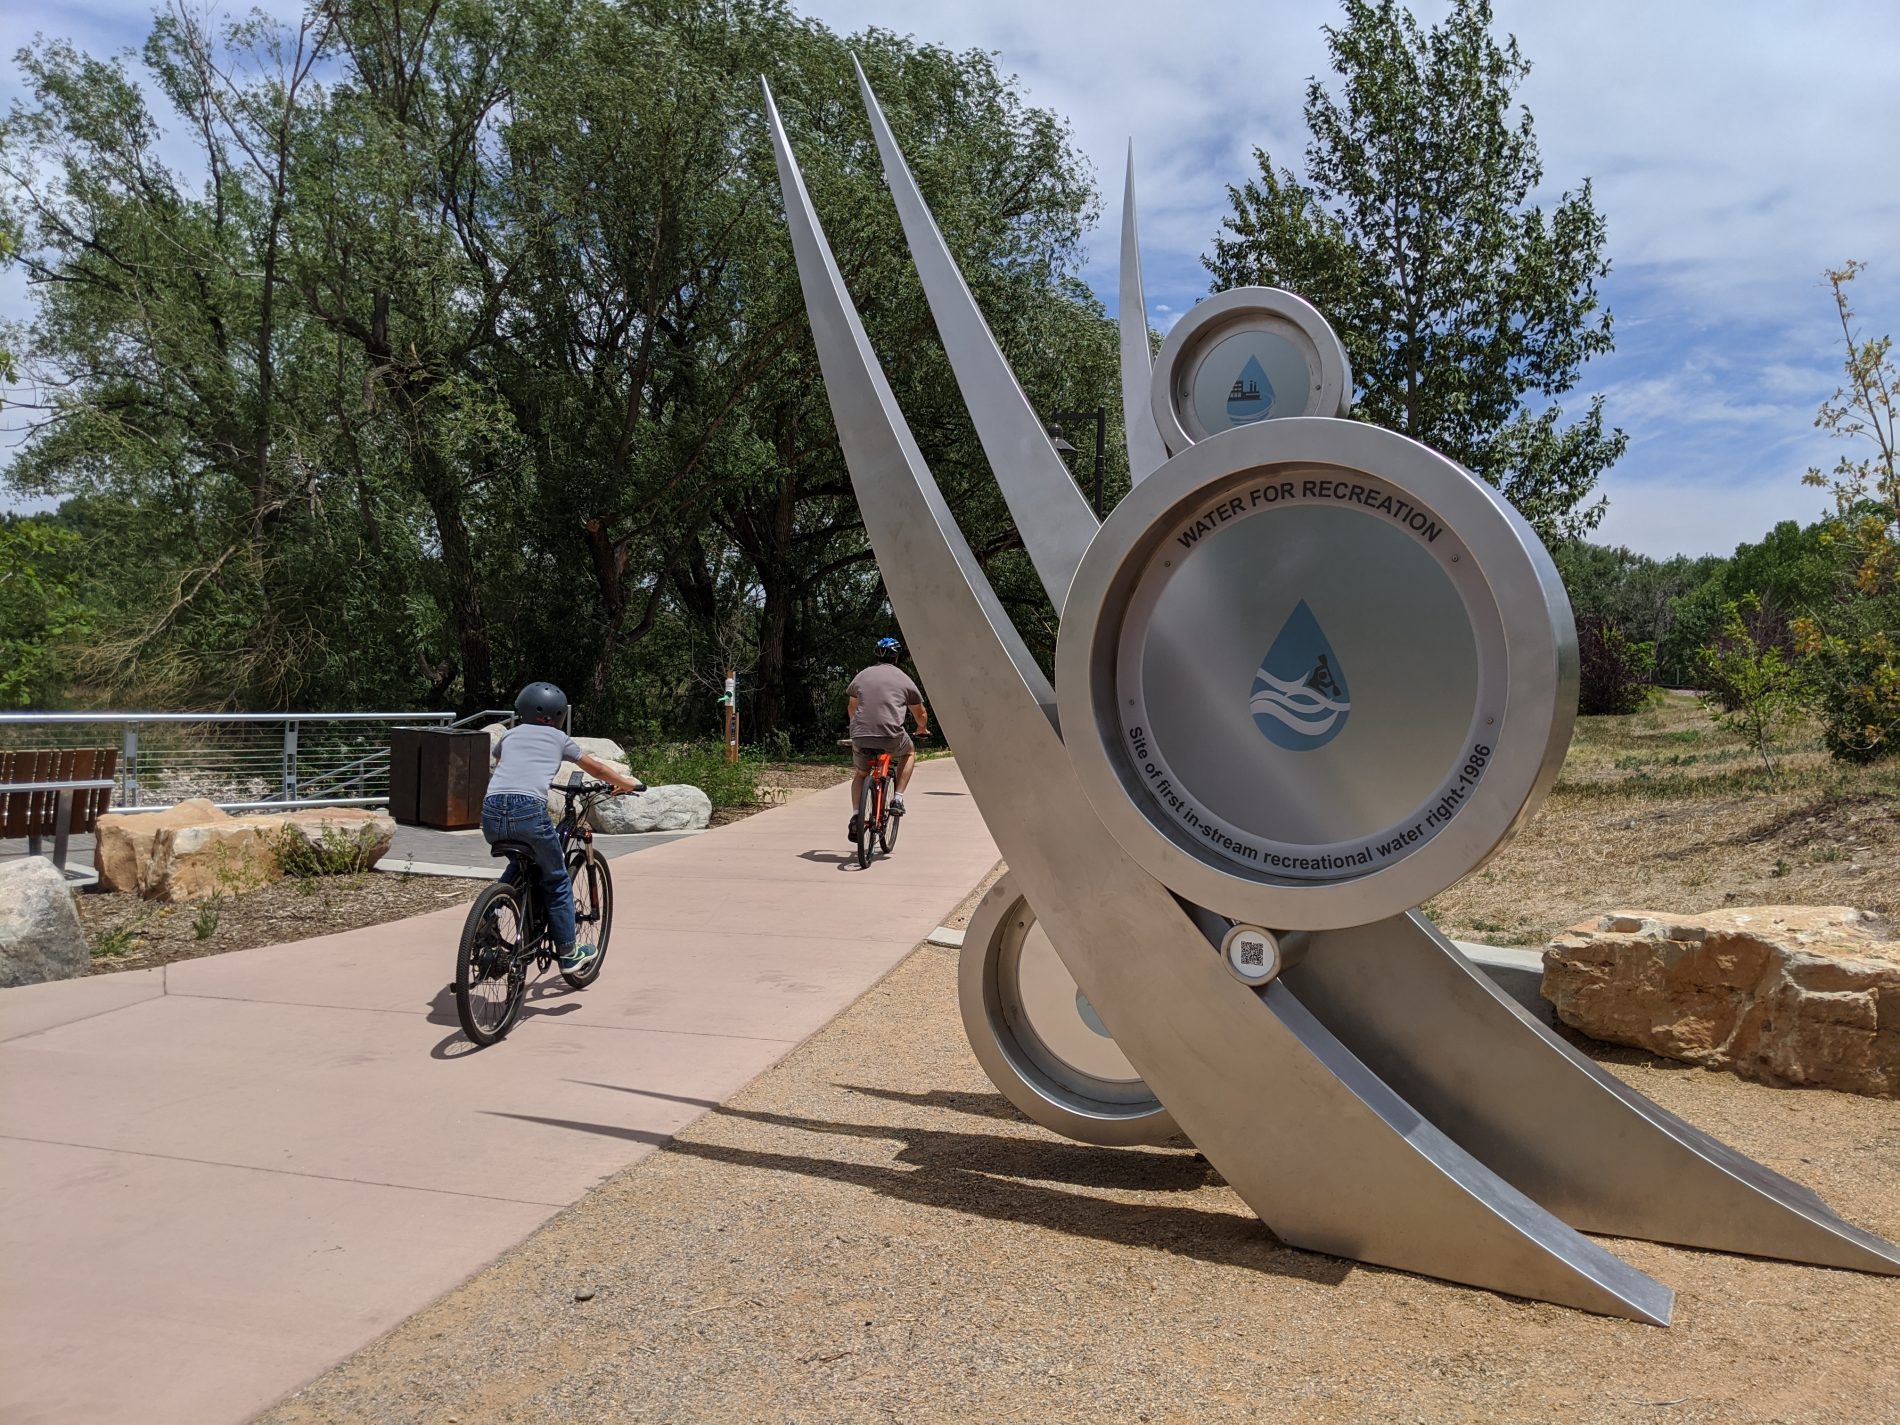 New Heritage Trail Connects Sites Throughout the Cache la Poudre River National Heritage Area, Starting with Poudre River Whitewater Park